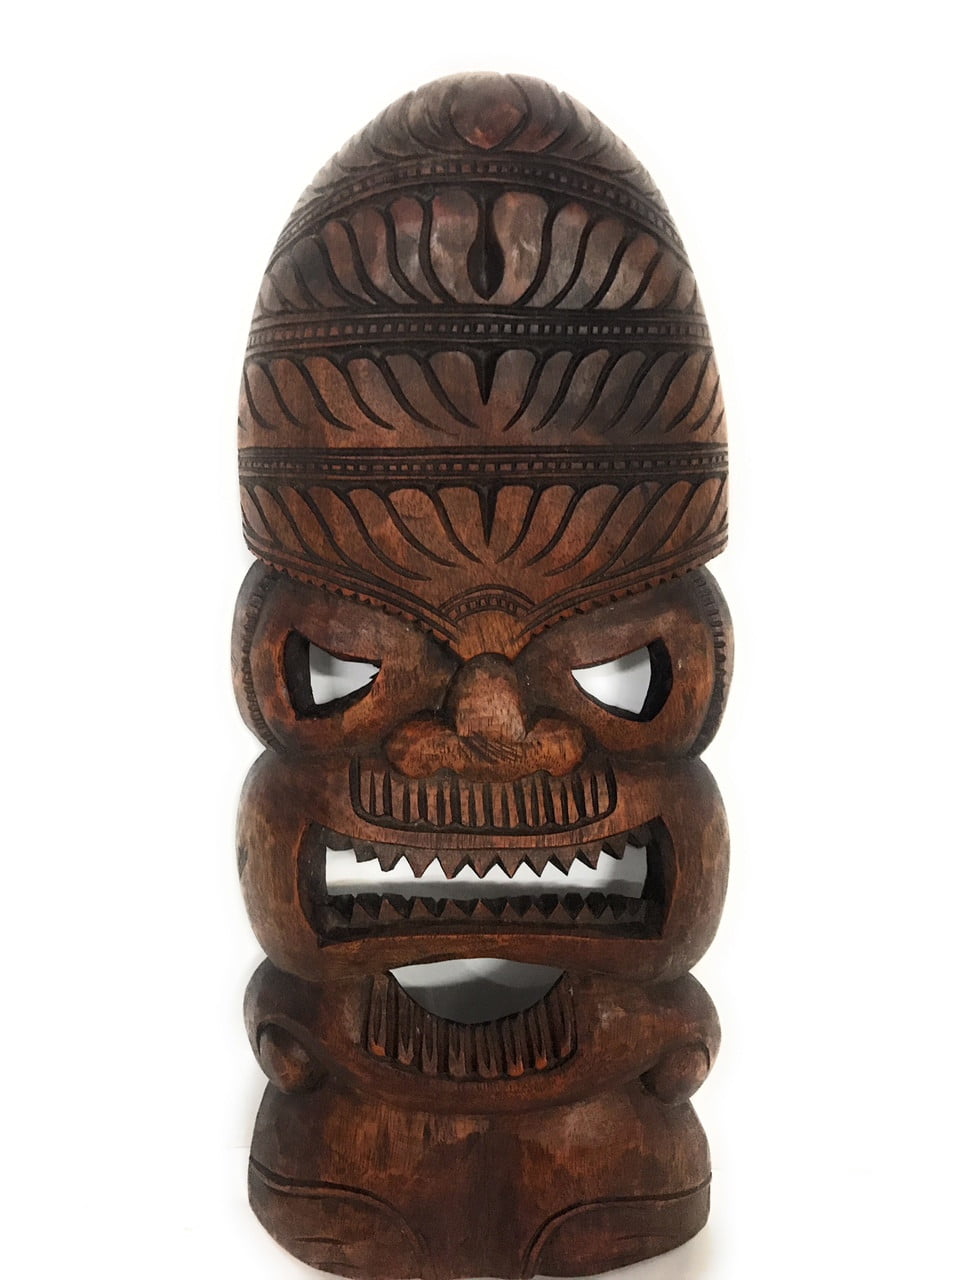 God of Surf Tiki Mask 36" Stained Monkeypod Hand Carved#rti201590s 